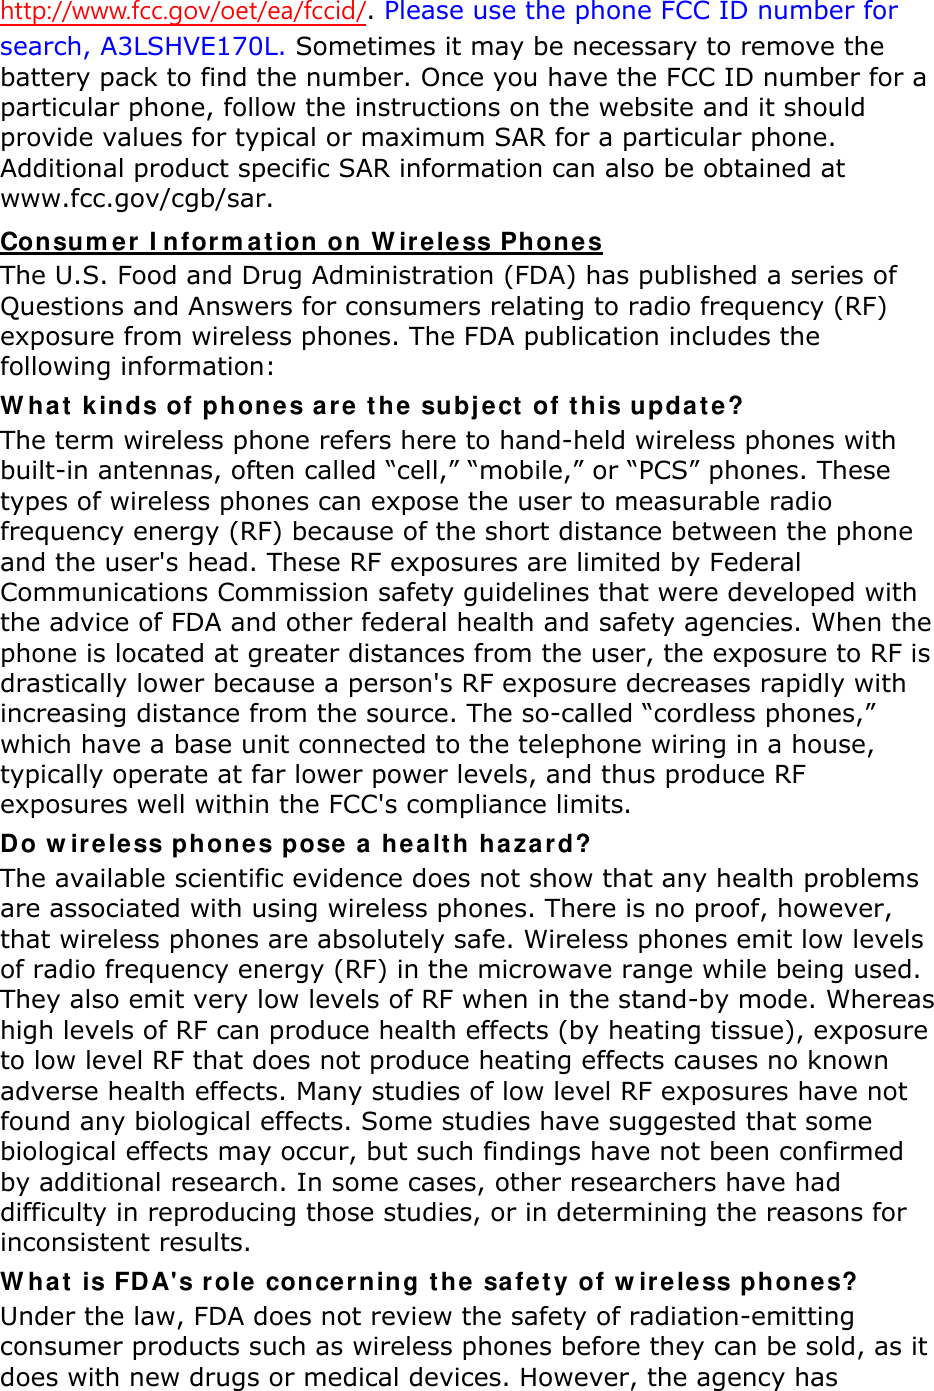 http://www.fcc.gov/oet/ea/fccid/. Please use the phone FCC ID number for search, A3LSHVE170L. Sometimes it may be necessary to remove the battery pack to find the number. Once you have the FCC ID number for a particular phone, follow the instructions on the website and it should provide values for typical or maximum SAR for a particular phone. Additional product specific SAR information can also be obtained at www.fcc.gov/cgb/sar. Consumer Information on Wireless Phones The U.S. Food and Drug Administration (FDA) has published a series of Questions and Answers for consumers relating to radio frequency (RF) exposure from wireless phones. The FDA publication includes the following information: What kinds of phones are the subject of this update? The term wireless phone refers here to hand-held wireless phones with built-in antennas, often called “cell,” “mobile,” or “PCS” phones. These types of wireless phones can expose the user to measurable radio frequency energy (RF) because of the short distance between the phone and the user&apos;s head. These RF exposures are limited by Federal Communications Commission safety guidelines that were developed with the advice of FDA and other federal health and safety agencies. When the phone is located at greater distances from the user, the exposure to RF is drastically lower because a person&apos;s RF exposure decreases rapidly with increasing distance from the source. The so-called “cordless phones,” which have a base unit connected to the telephone wiring in a house, typically operate at far lower power levels, and thus produce RF exposures well within the FCC&apos;s compliance limits. Do wireless phones pose a health hazard? The available scientific evidence does not show that any health problems are associated with using wireless phones. There is no proof, however, that wireless phones are absolutely safe. Wireless phones emit low levels of radio frequency energy (RF) in the microwave range while being used. They also emit very low levels of RF when in the stand-by mode. Whereas high levels of RF can produce health effects (by heating tissue), exposure to low level RF that does not produce heating effects causes no known adverse health effects. Many studies of low level RF exposures have not found any biological effects. Some studies have suggested that some biological effects may occur, but such findings have not been confirmed by additional research. In some cases, other researchers have had difficulty in reproducing those studies, or in determining the reasons for inconsistent results. What is FDA&apos;s role concerning the safety of wireless phones? Under the law, FDA does not review the safety of radiation-emitting consumer products such as wireless phones before they can be sold, as it does with new drugs or medical devices. However, the agency has 